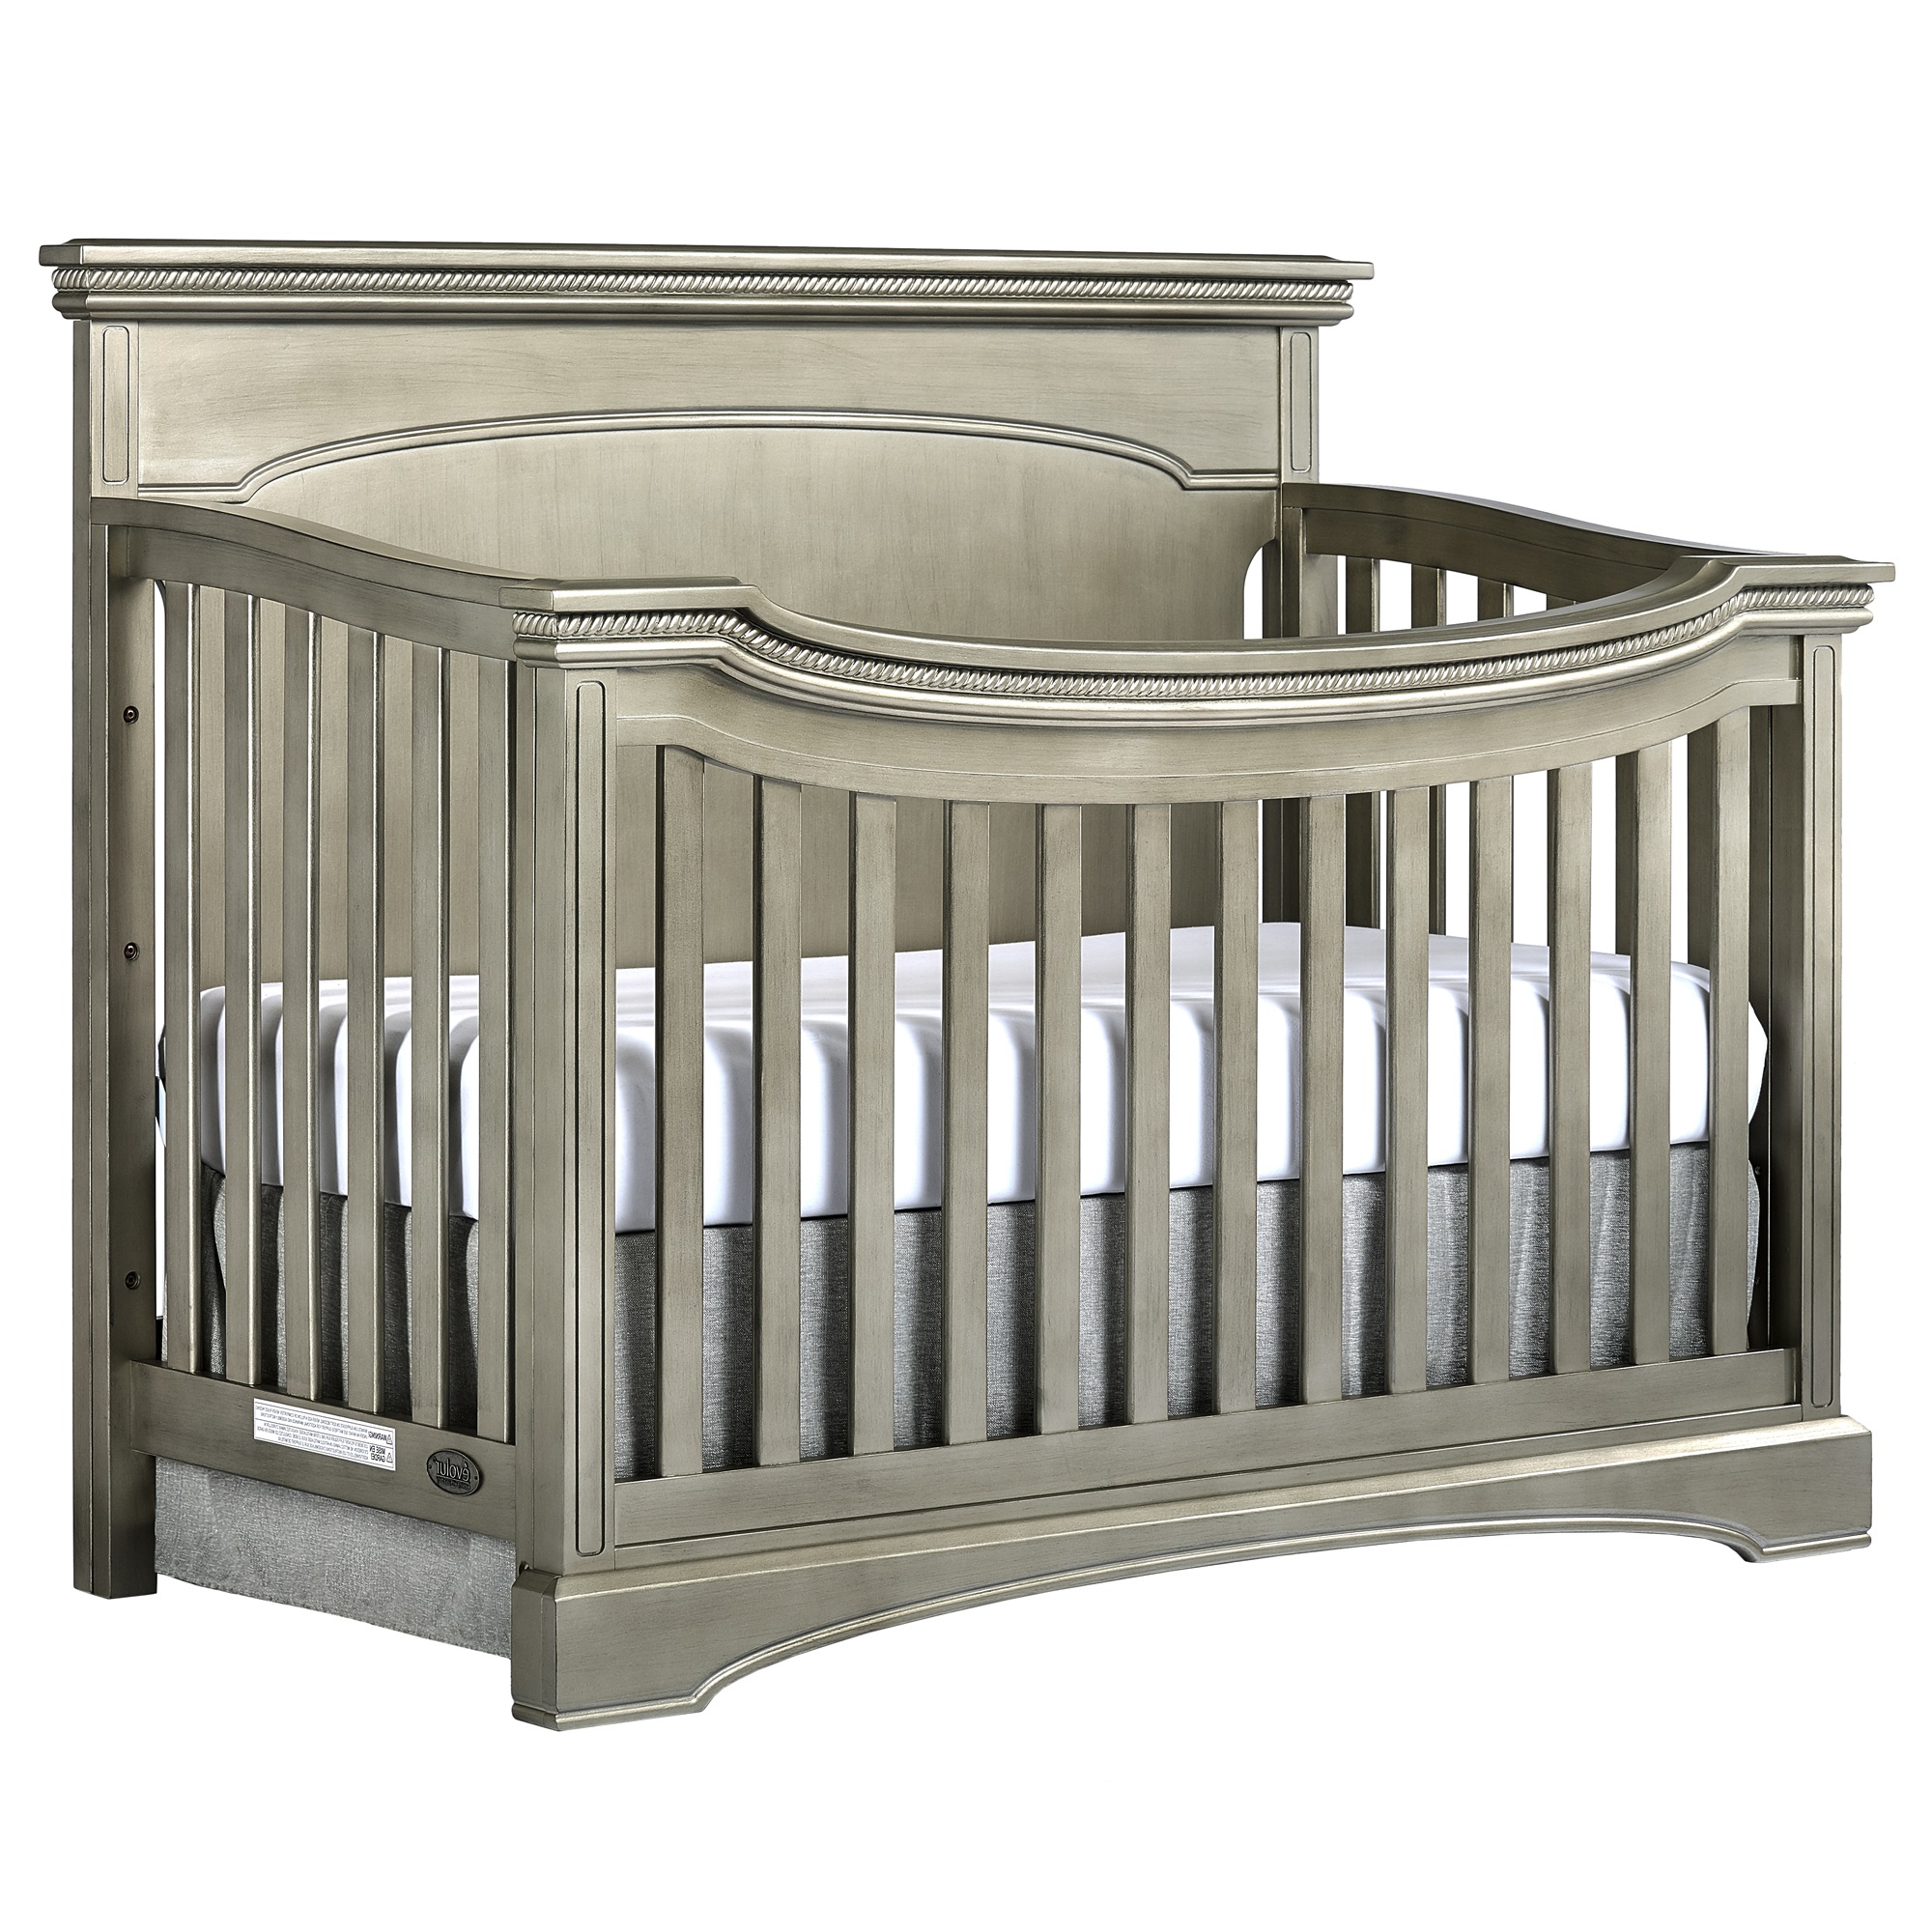 Evolur Catalina Flat Top Collection 4-in-1 Convertible Crib